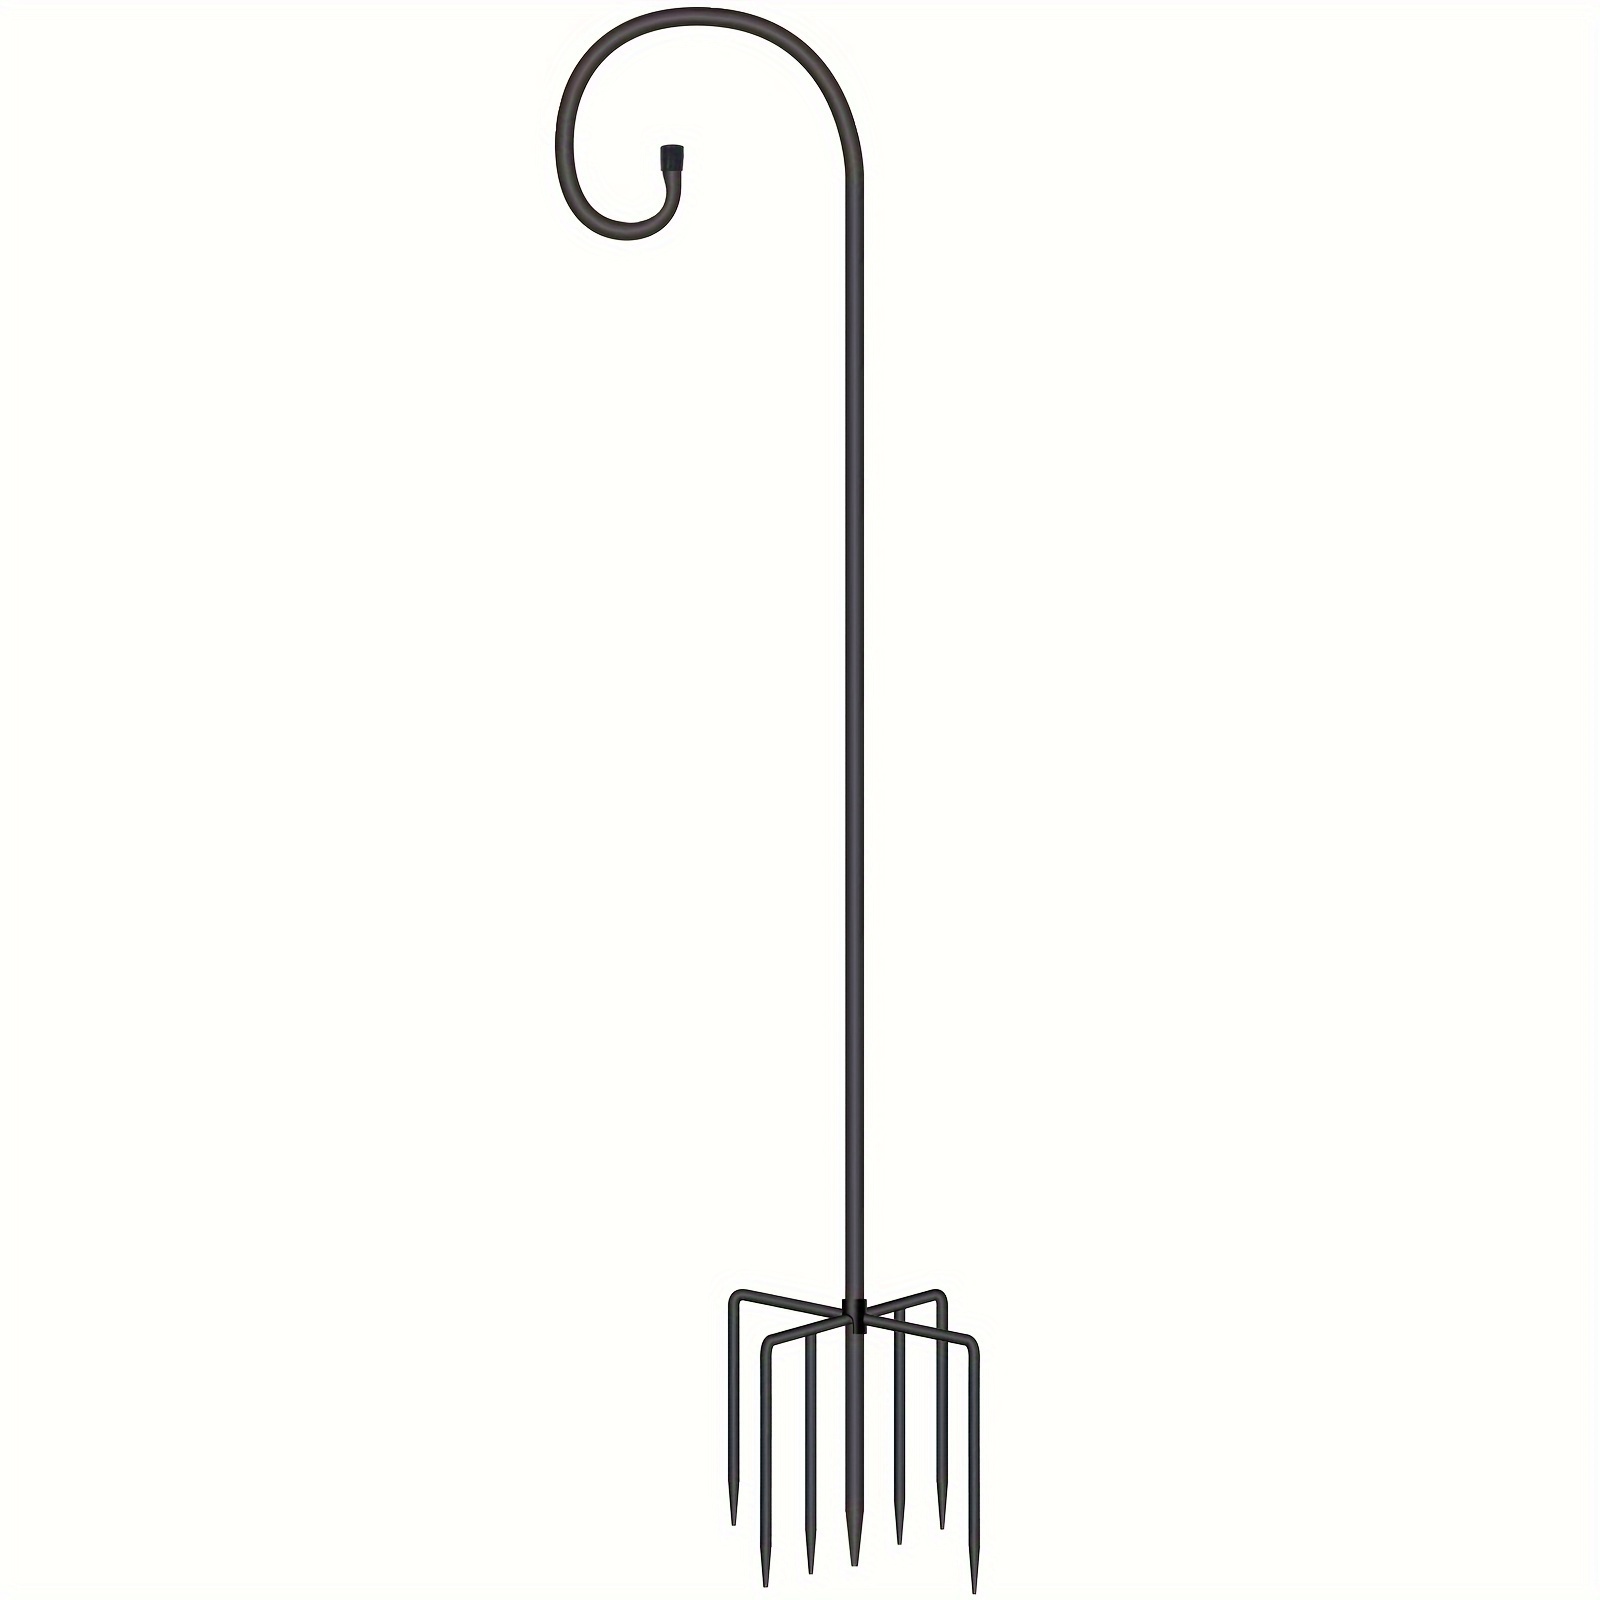 

Adjustable Shepherds Hook For Outdoor 76 Inch Bird Feeder Pole With 7 Prongs Base, 5/8 Inch Thick Heavy Duty For Hanging Bird Feeder, Plant Basket